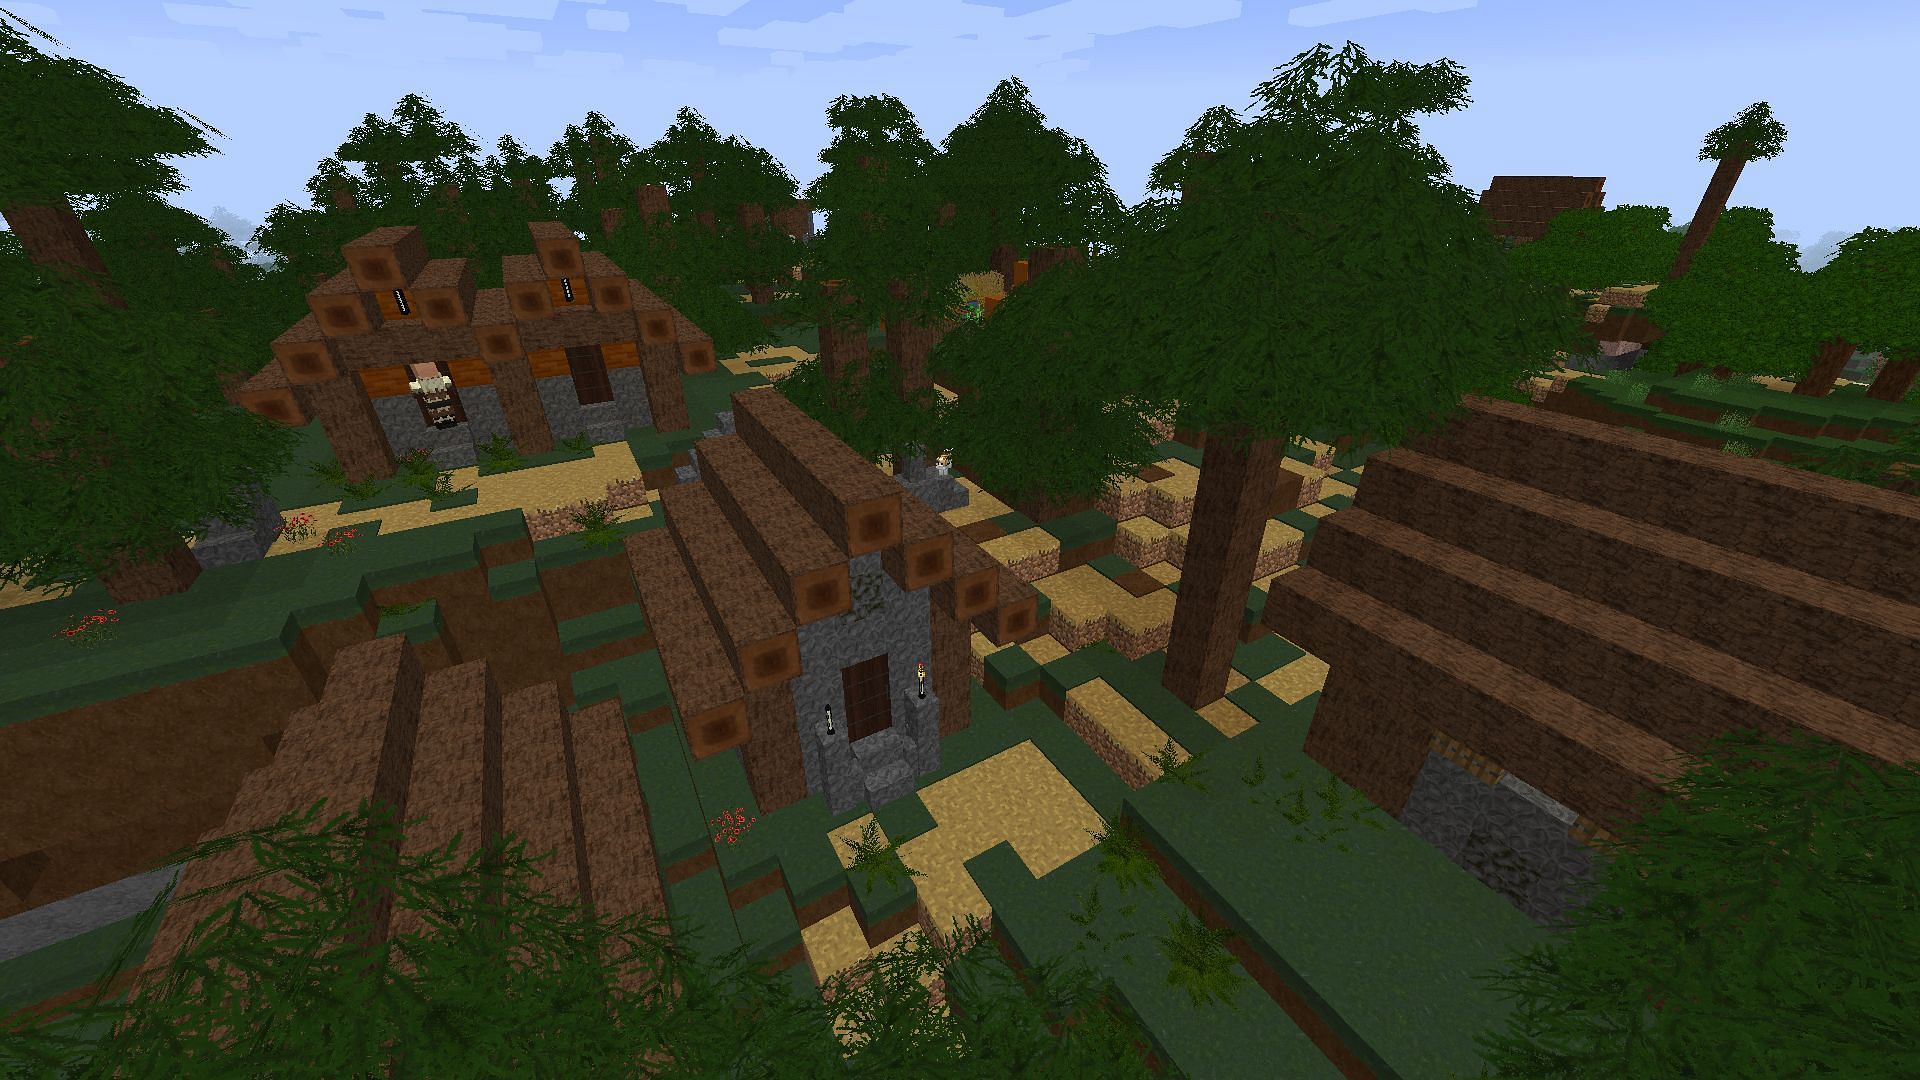 The village with the ModernArch R texture pack on (Image via Minecraft)